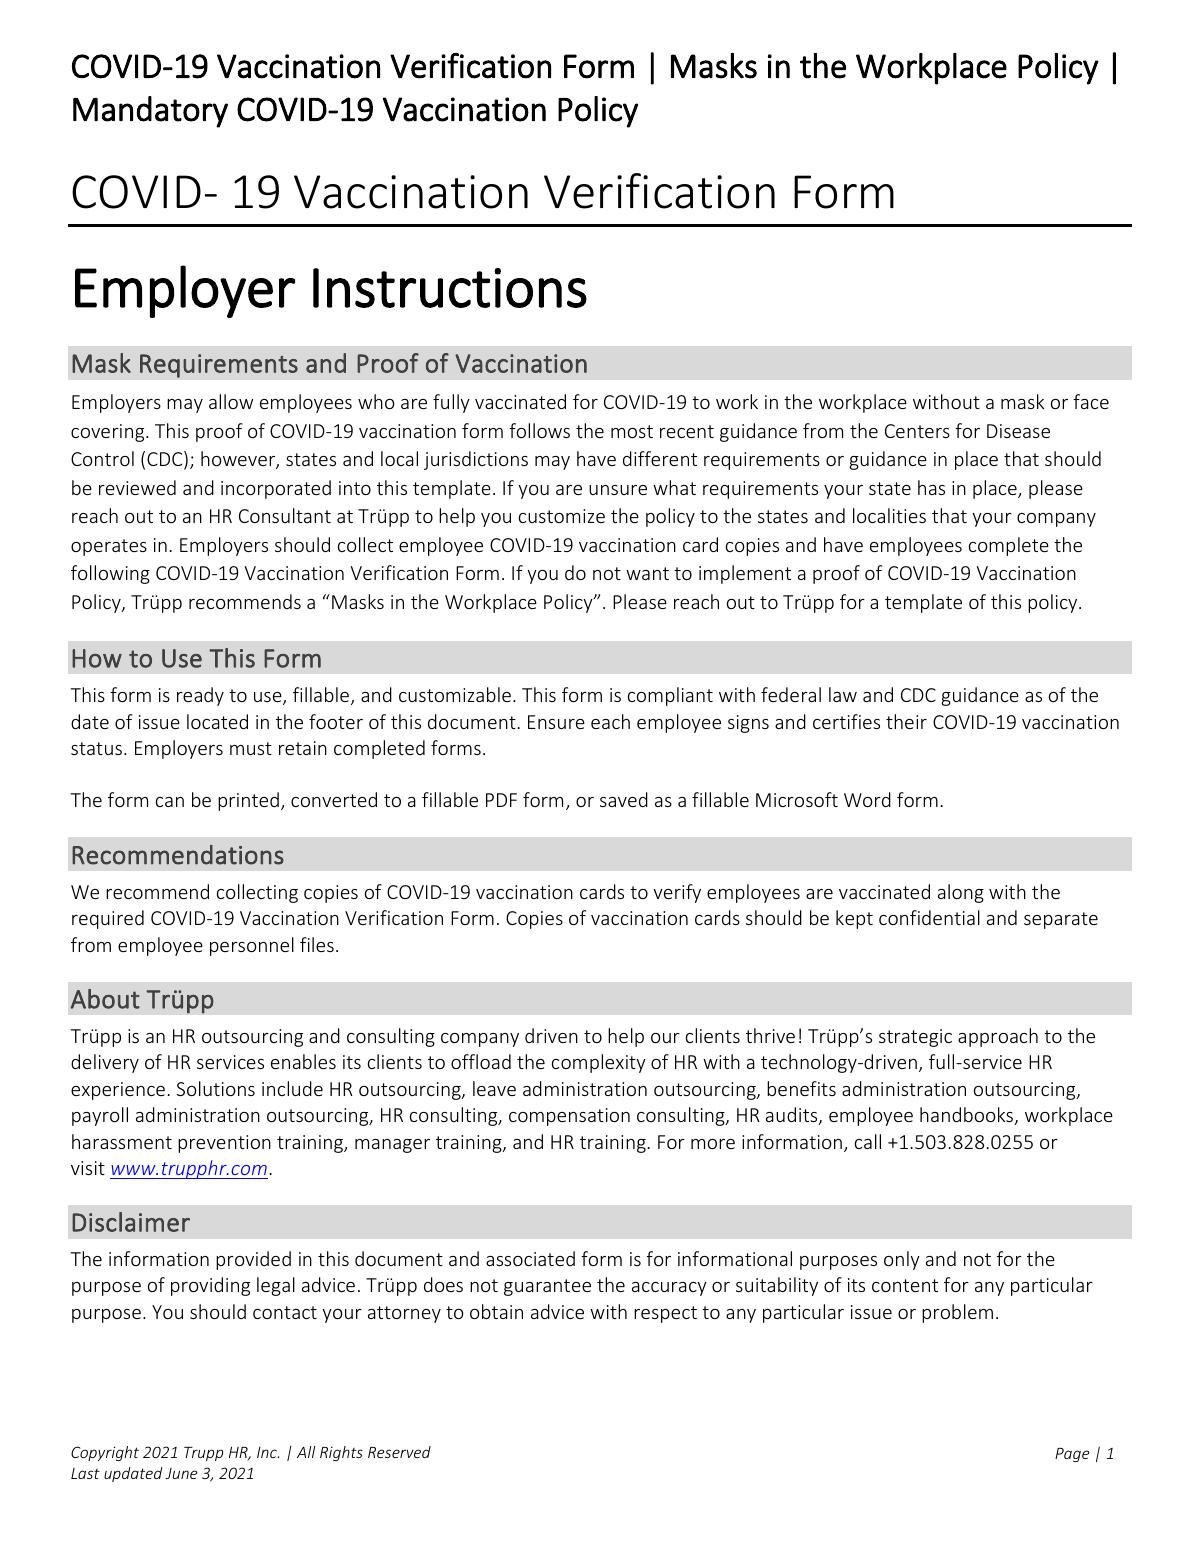 Download Free COVID-19 Vaccination Verification Form | Mask and Mandatory Vaccination Policy